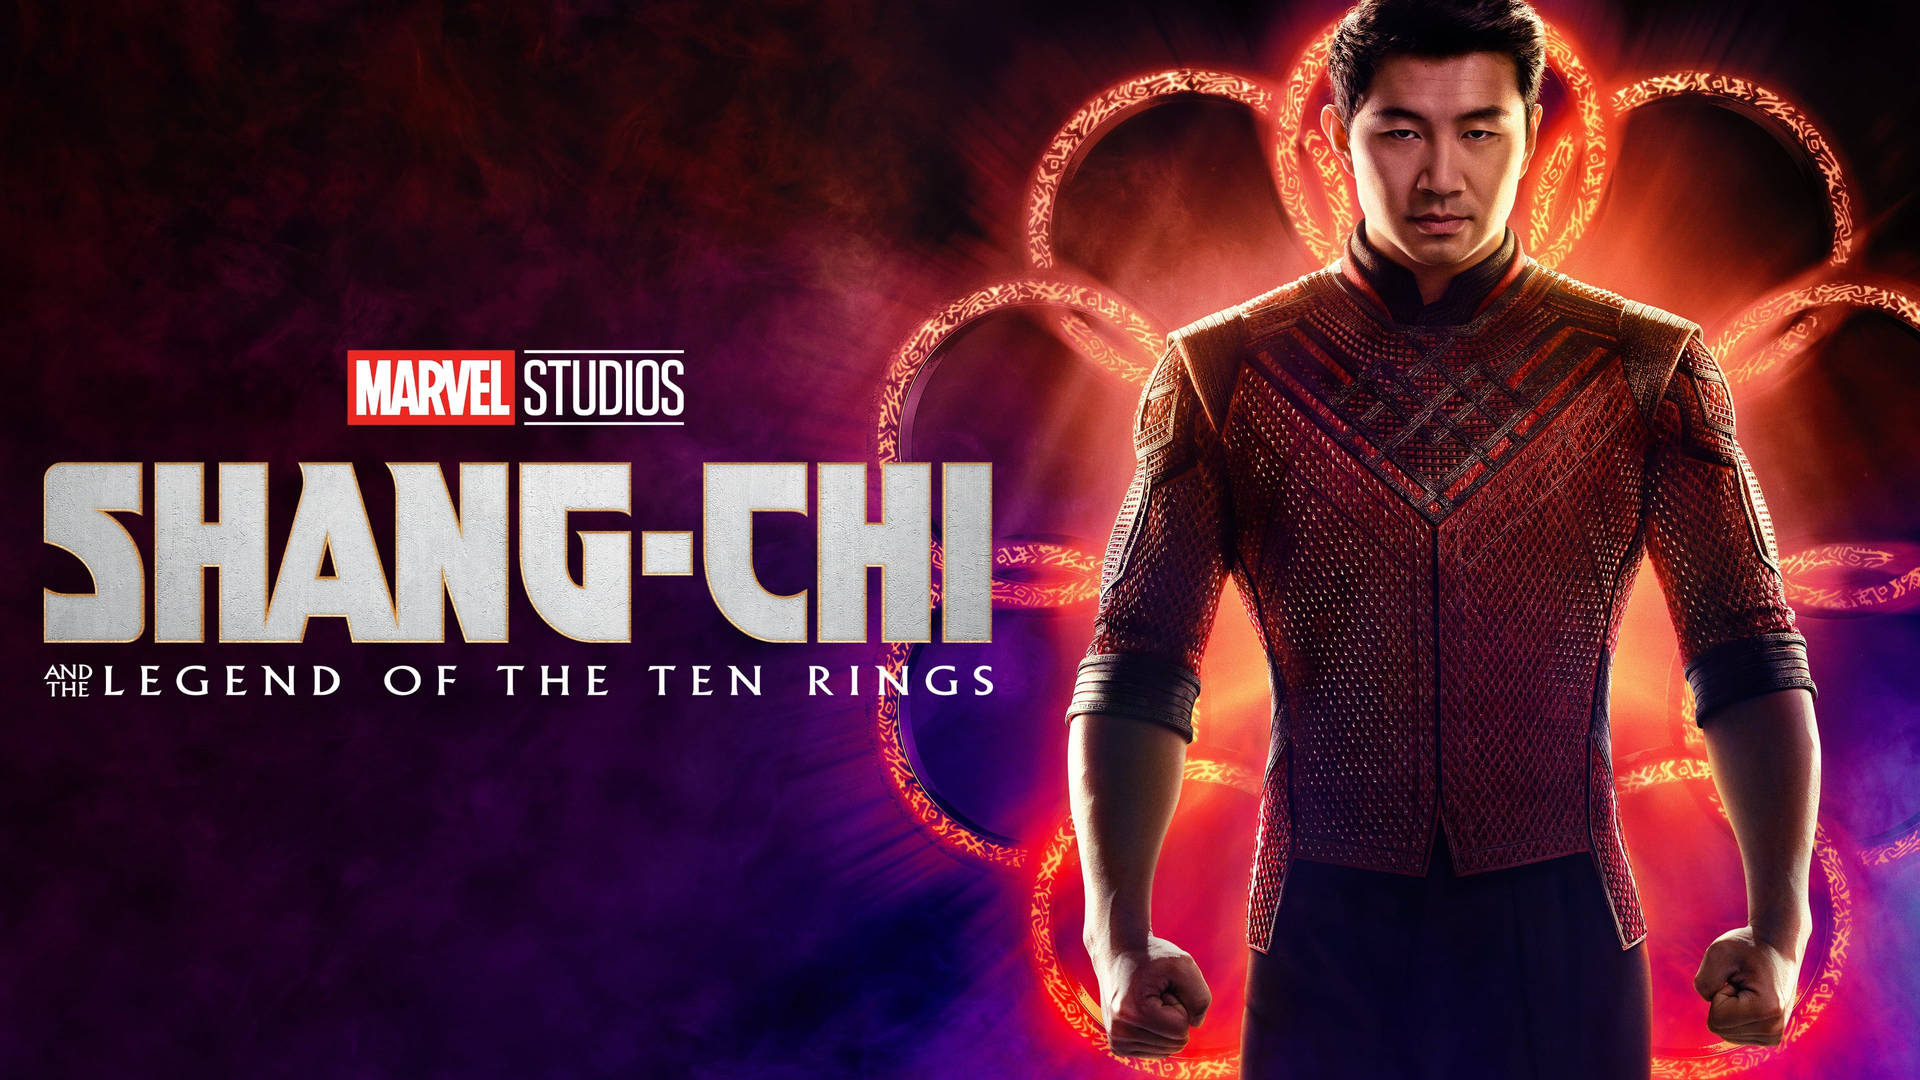 Shang-chi Official Movie Poster Background